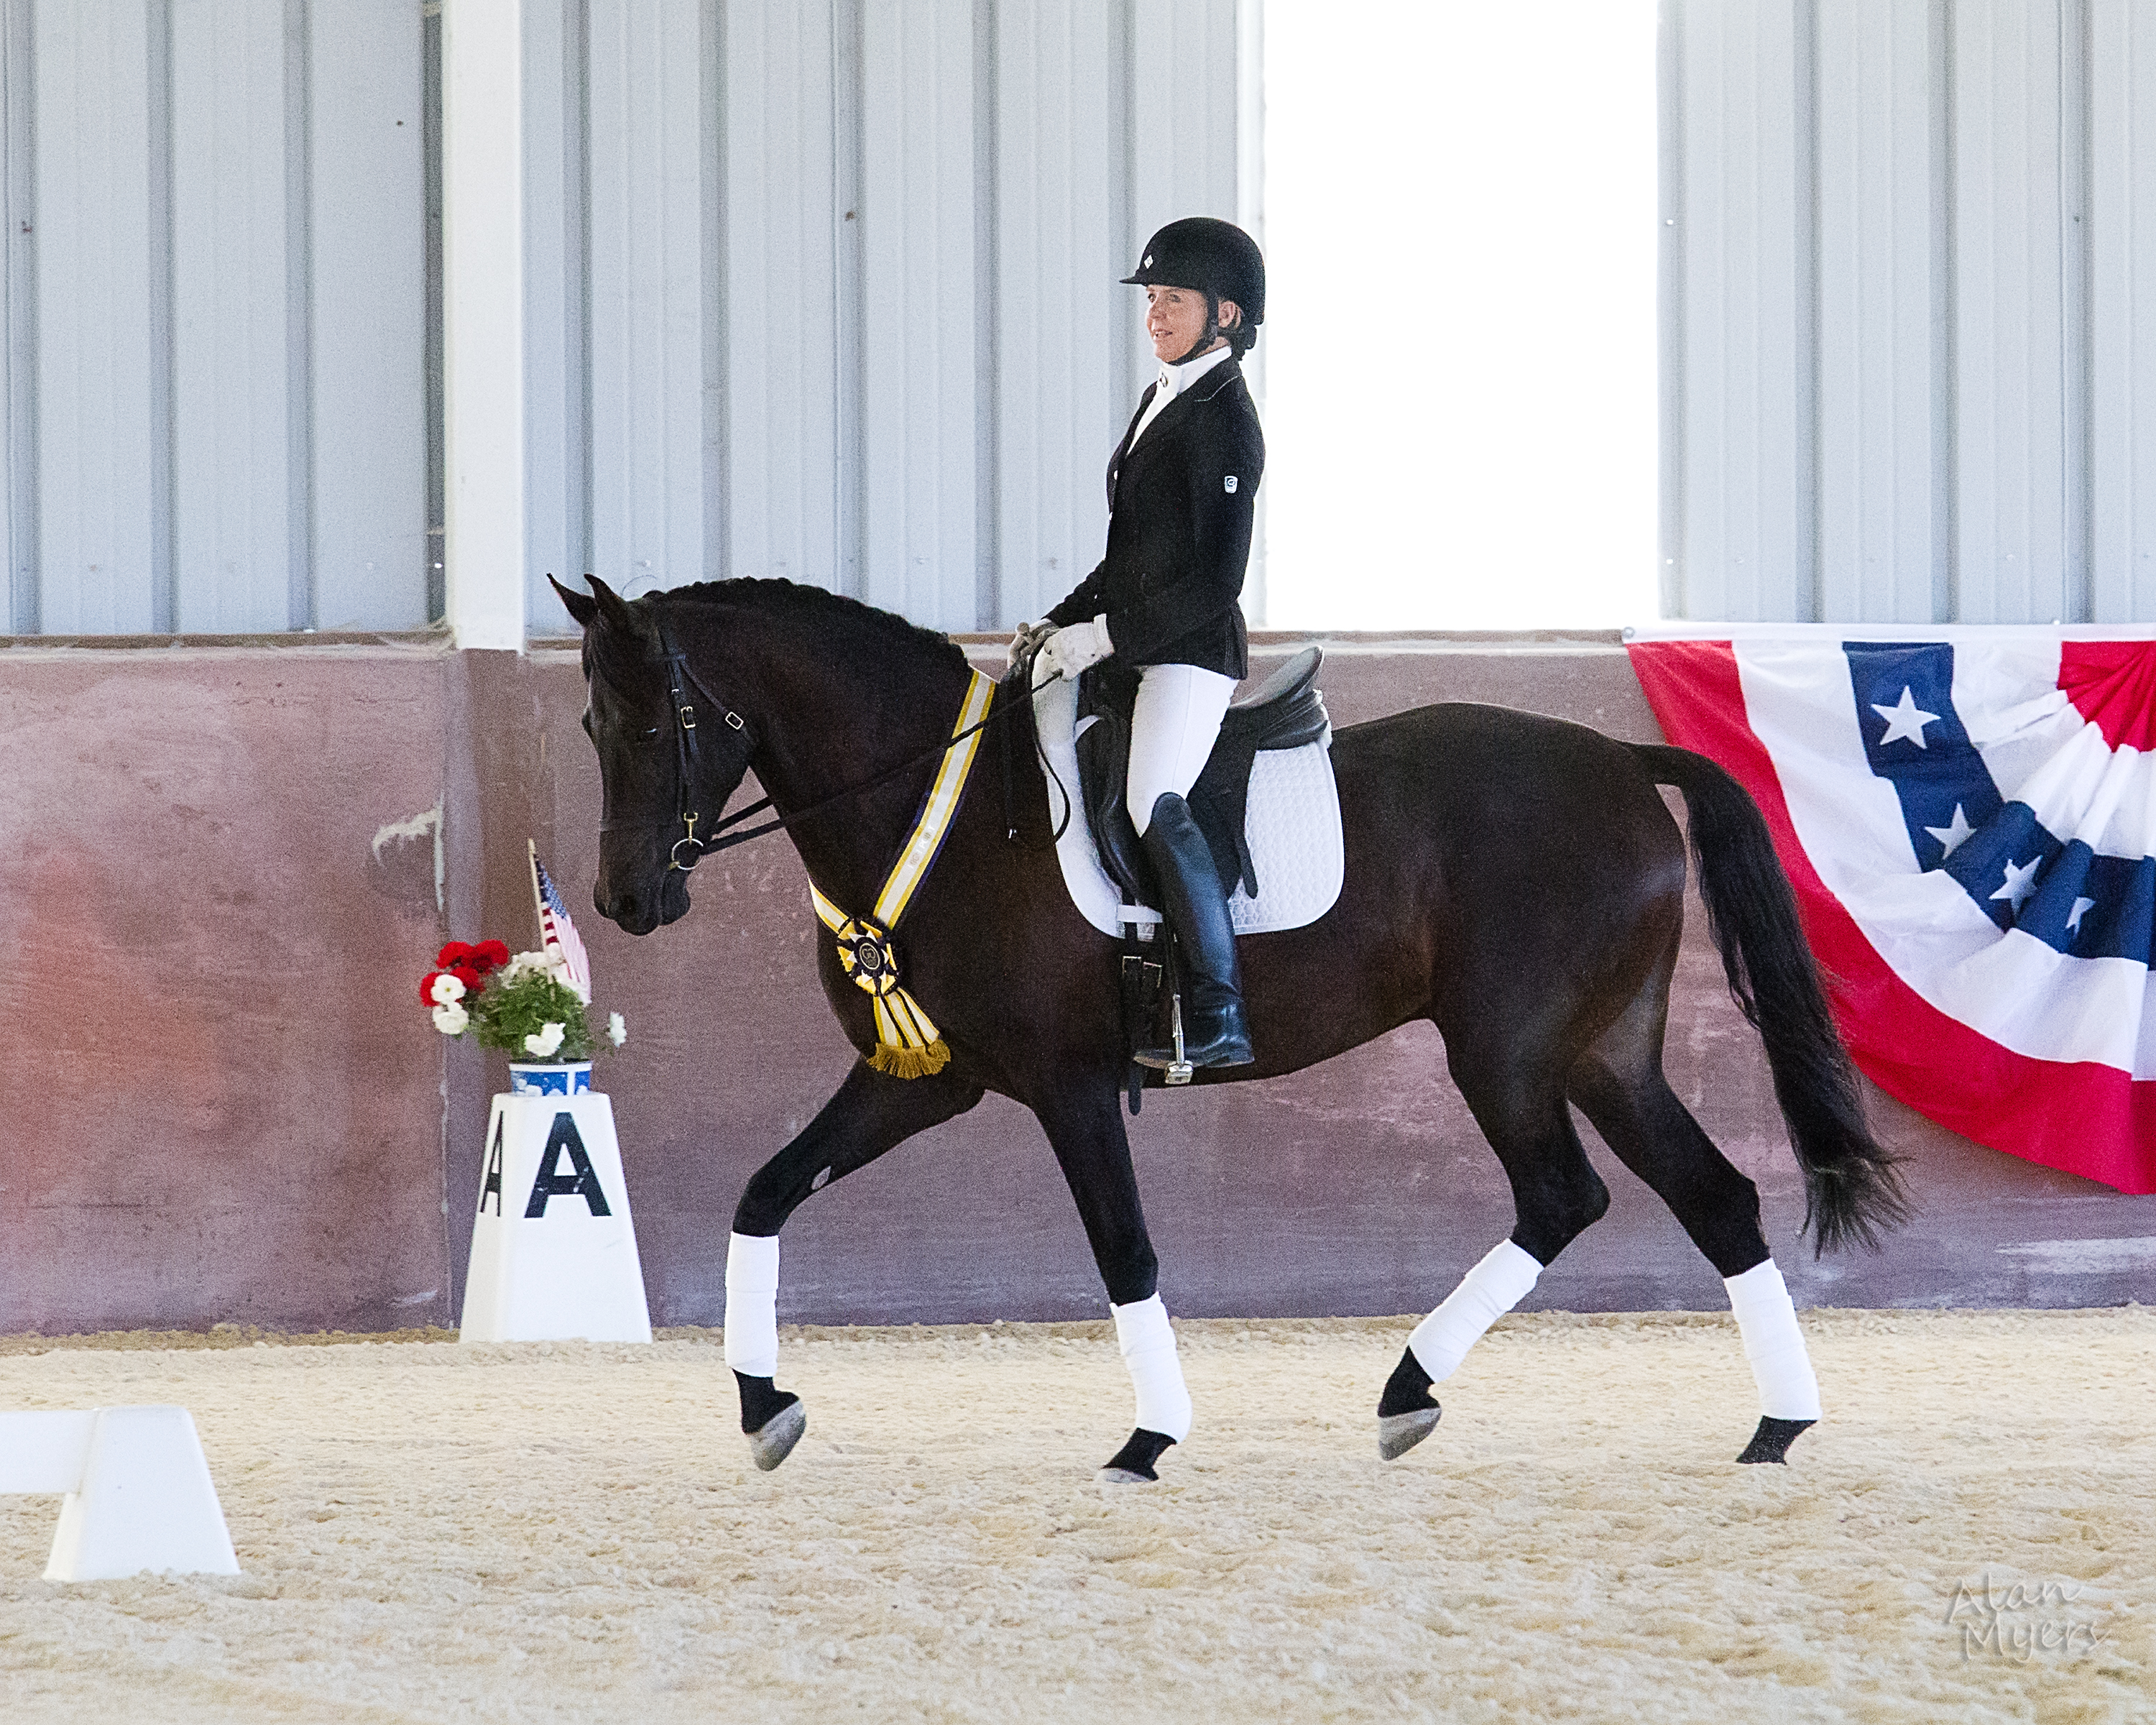 IT’S OFFICIAL, LUCKY IS A USDF ALL BREEDS CHAMPION!